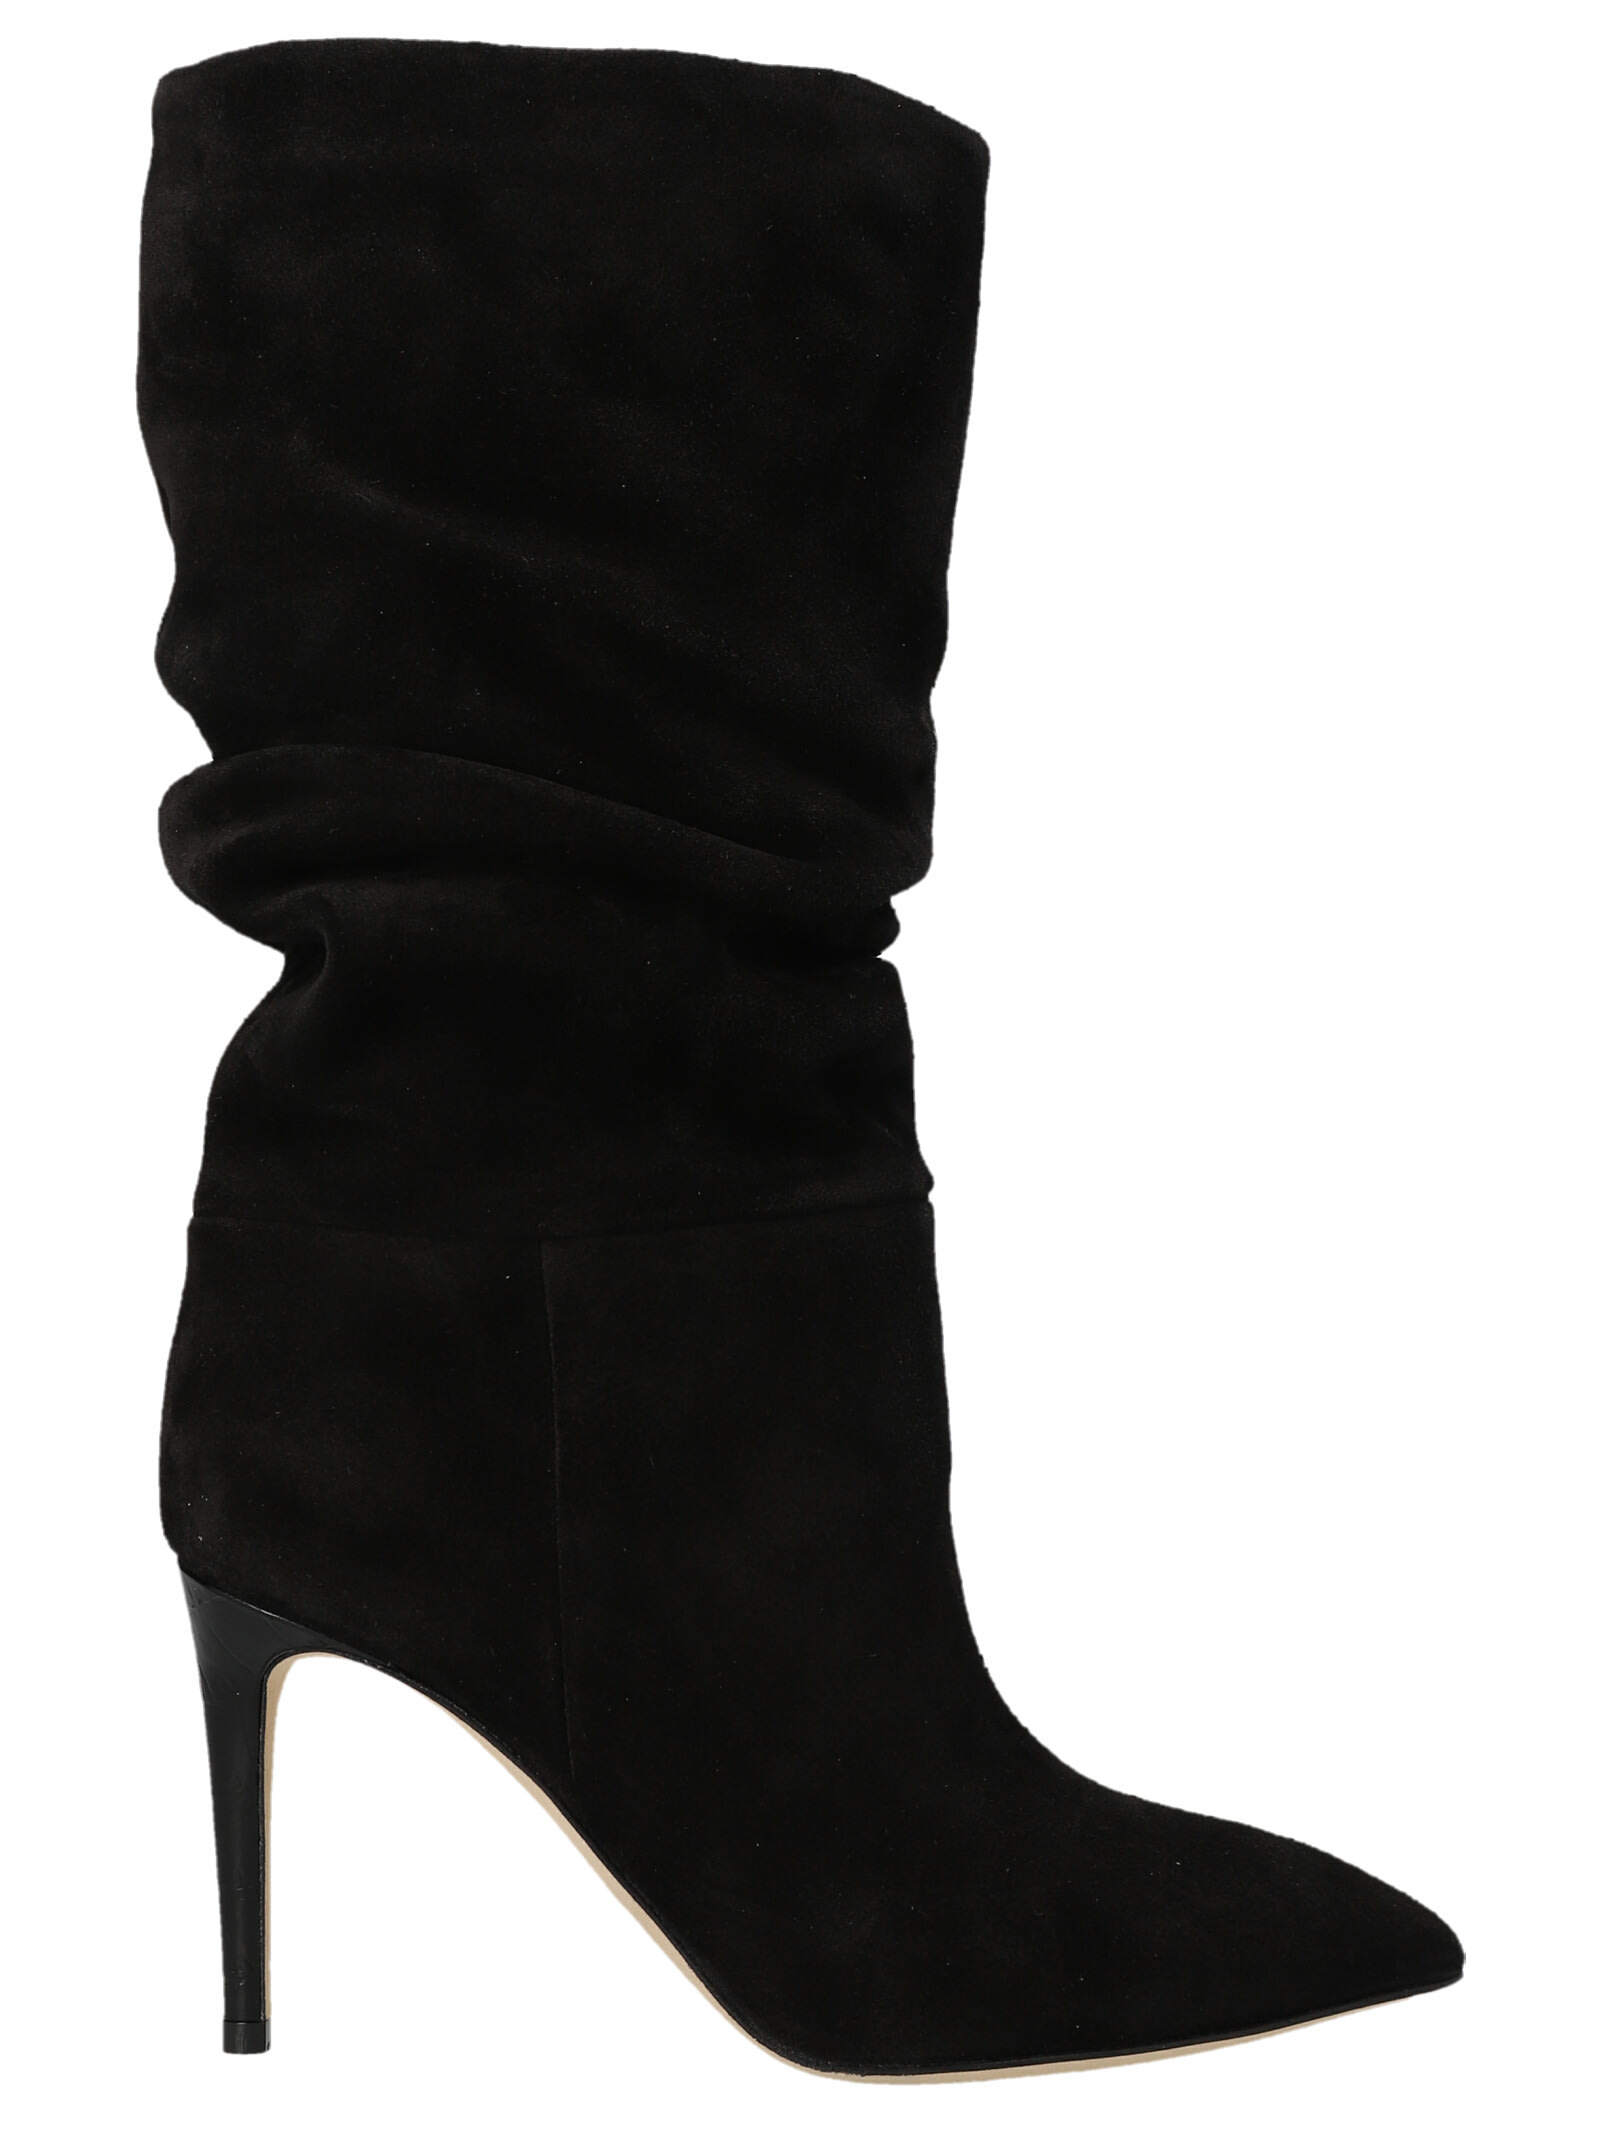 Paris Texas slouchy Boot Boots